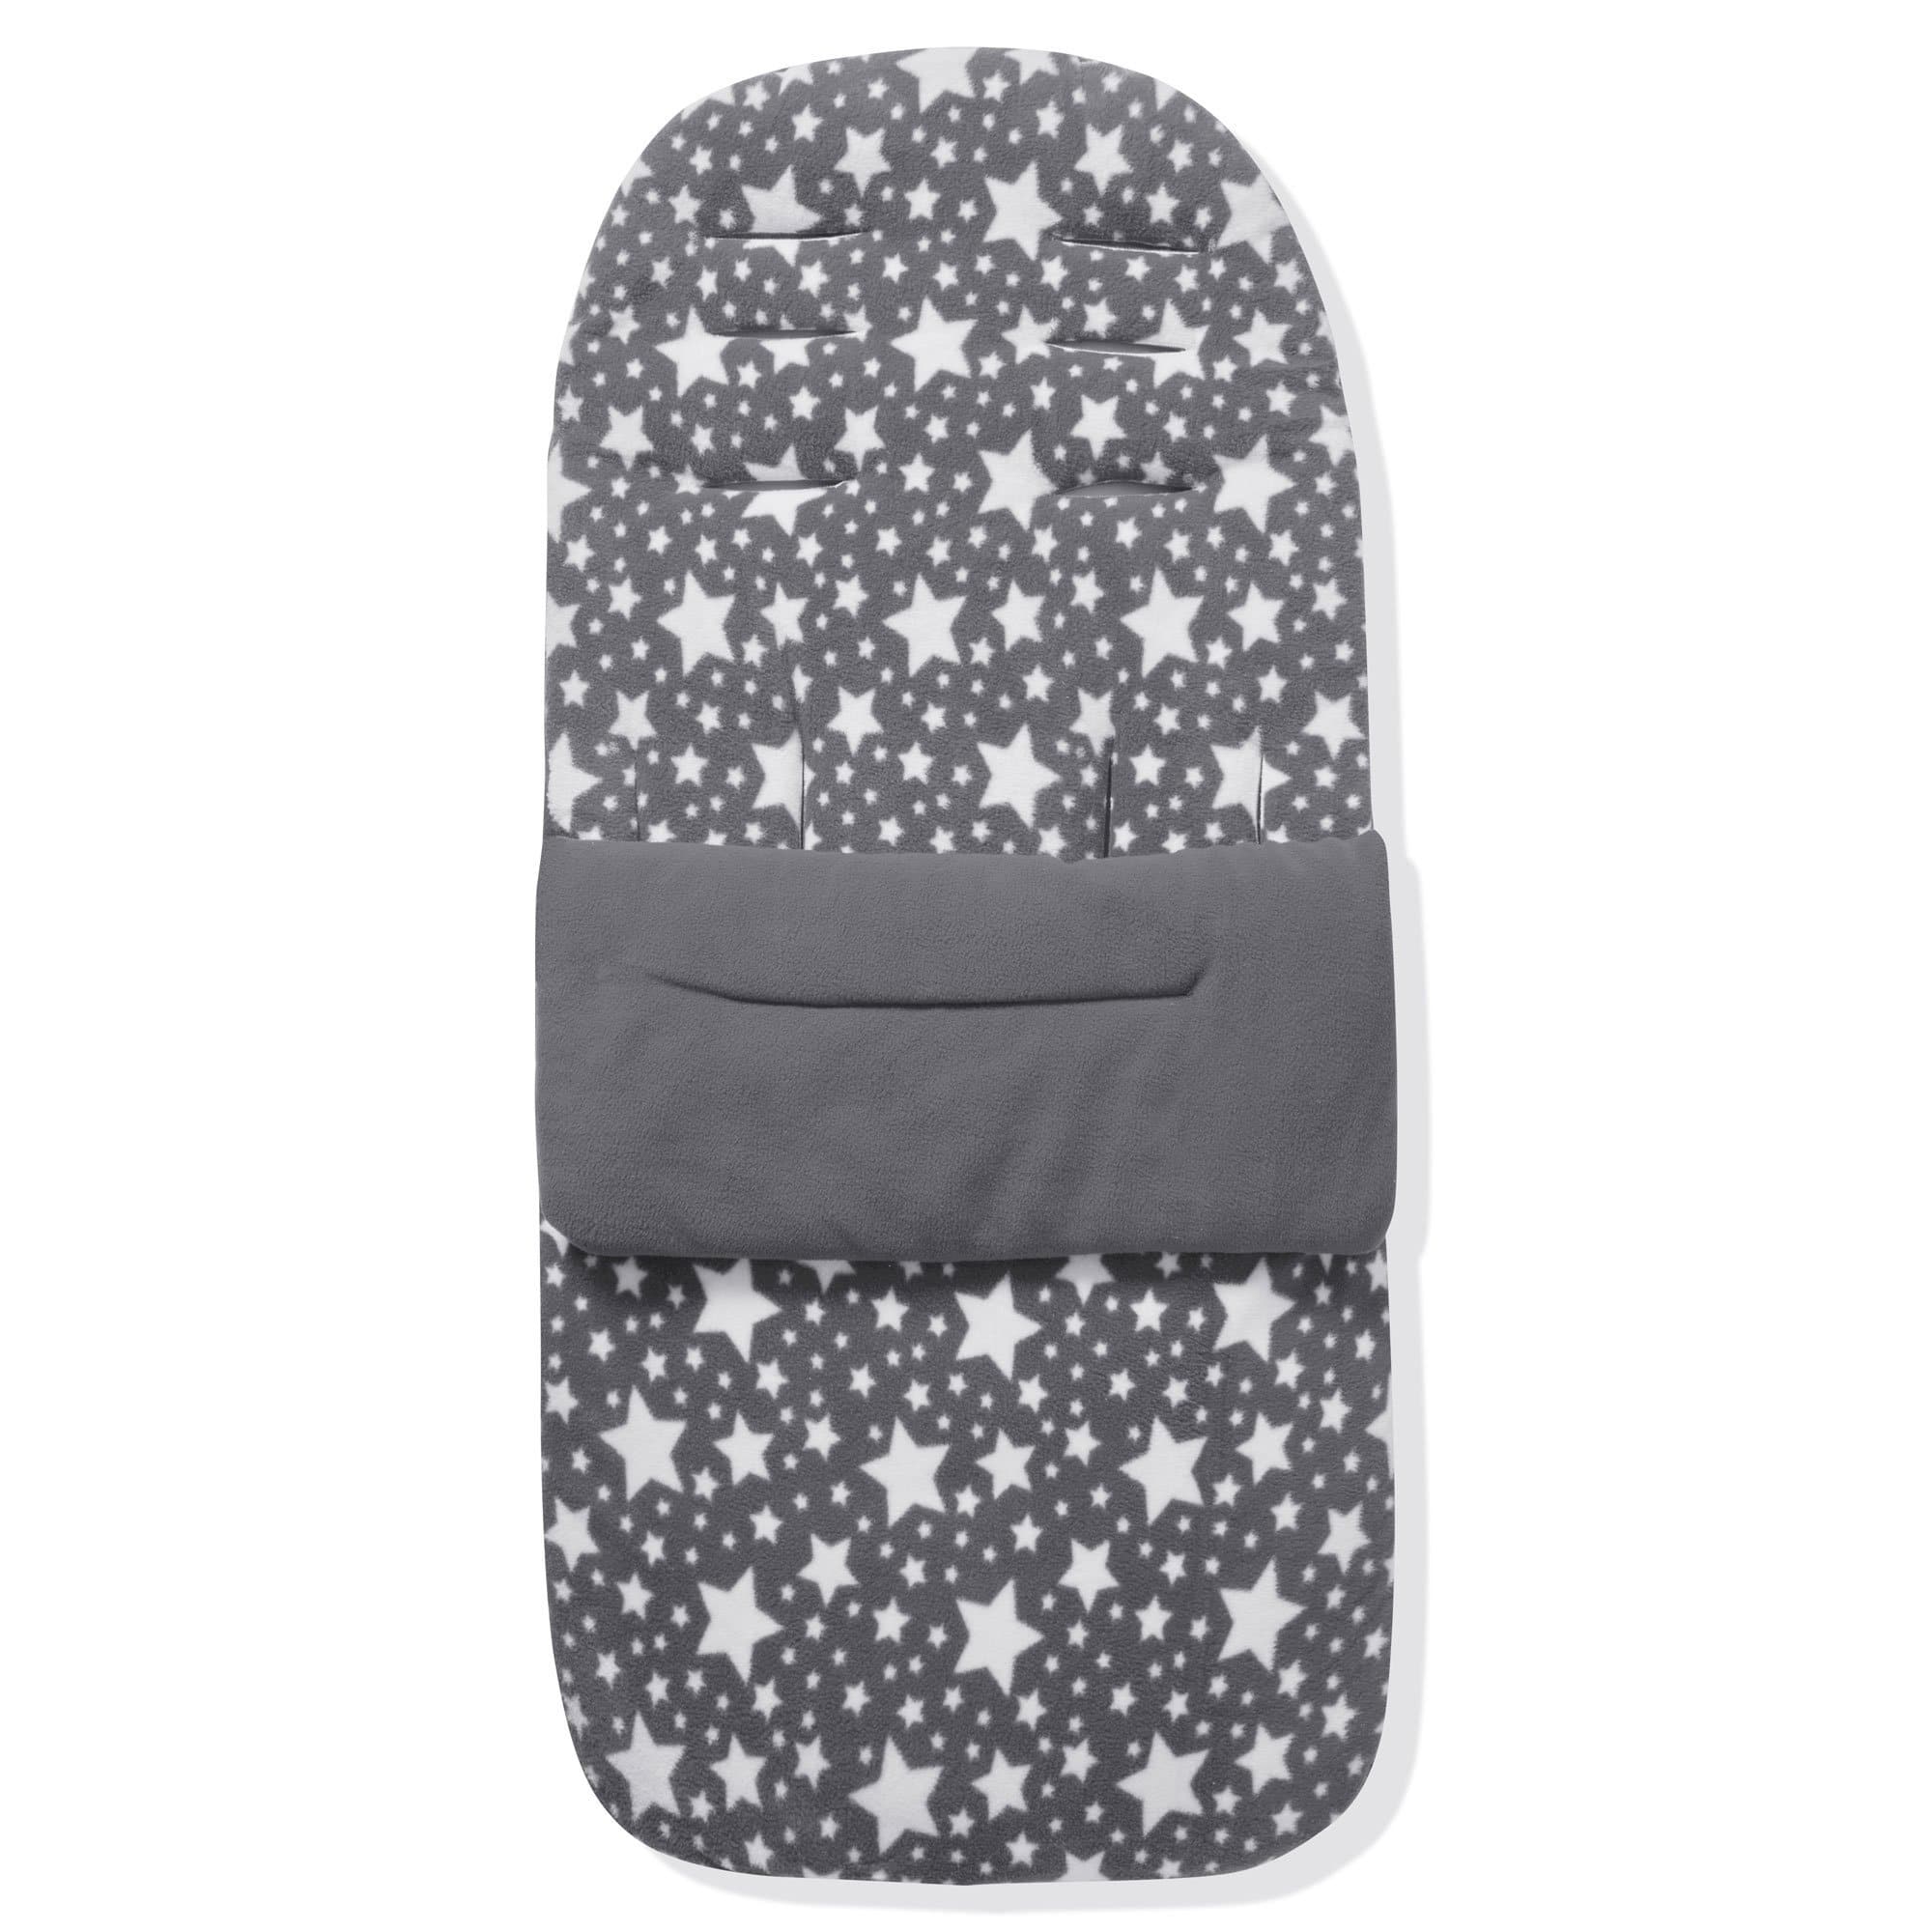 Fleece Footmuff / Cosy Toes Compatible with Noukies - Grey Star / Fits All Models | For Your Little One